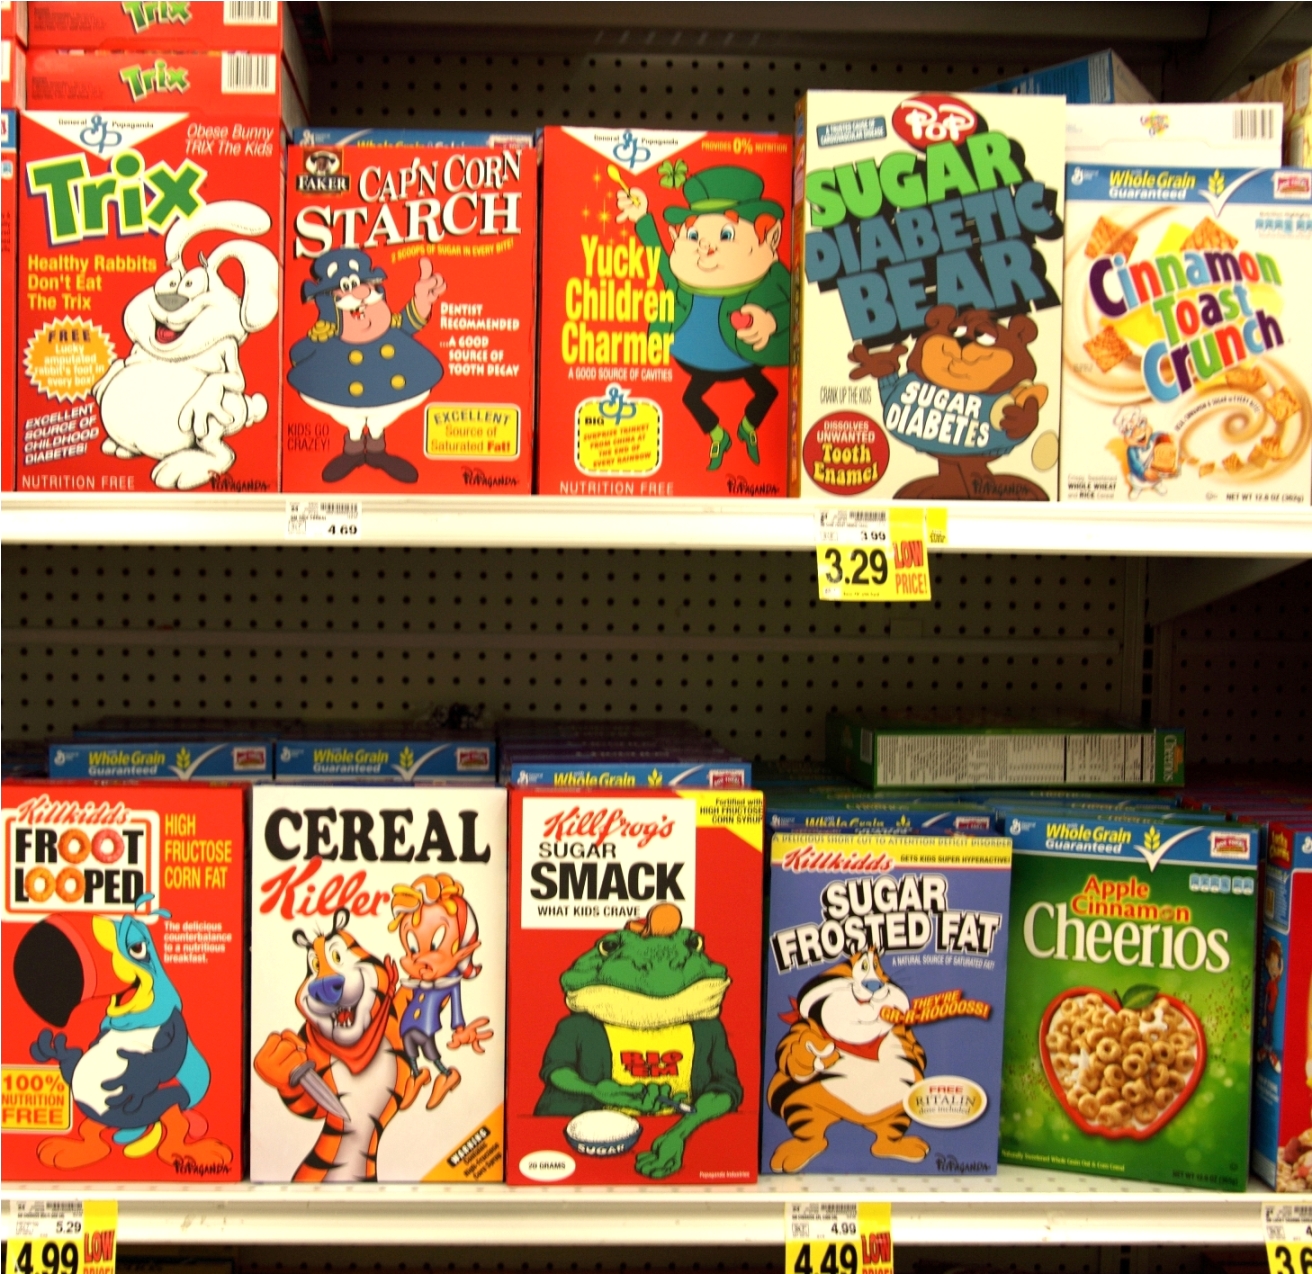 Real Cereals